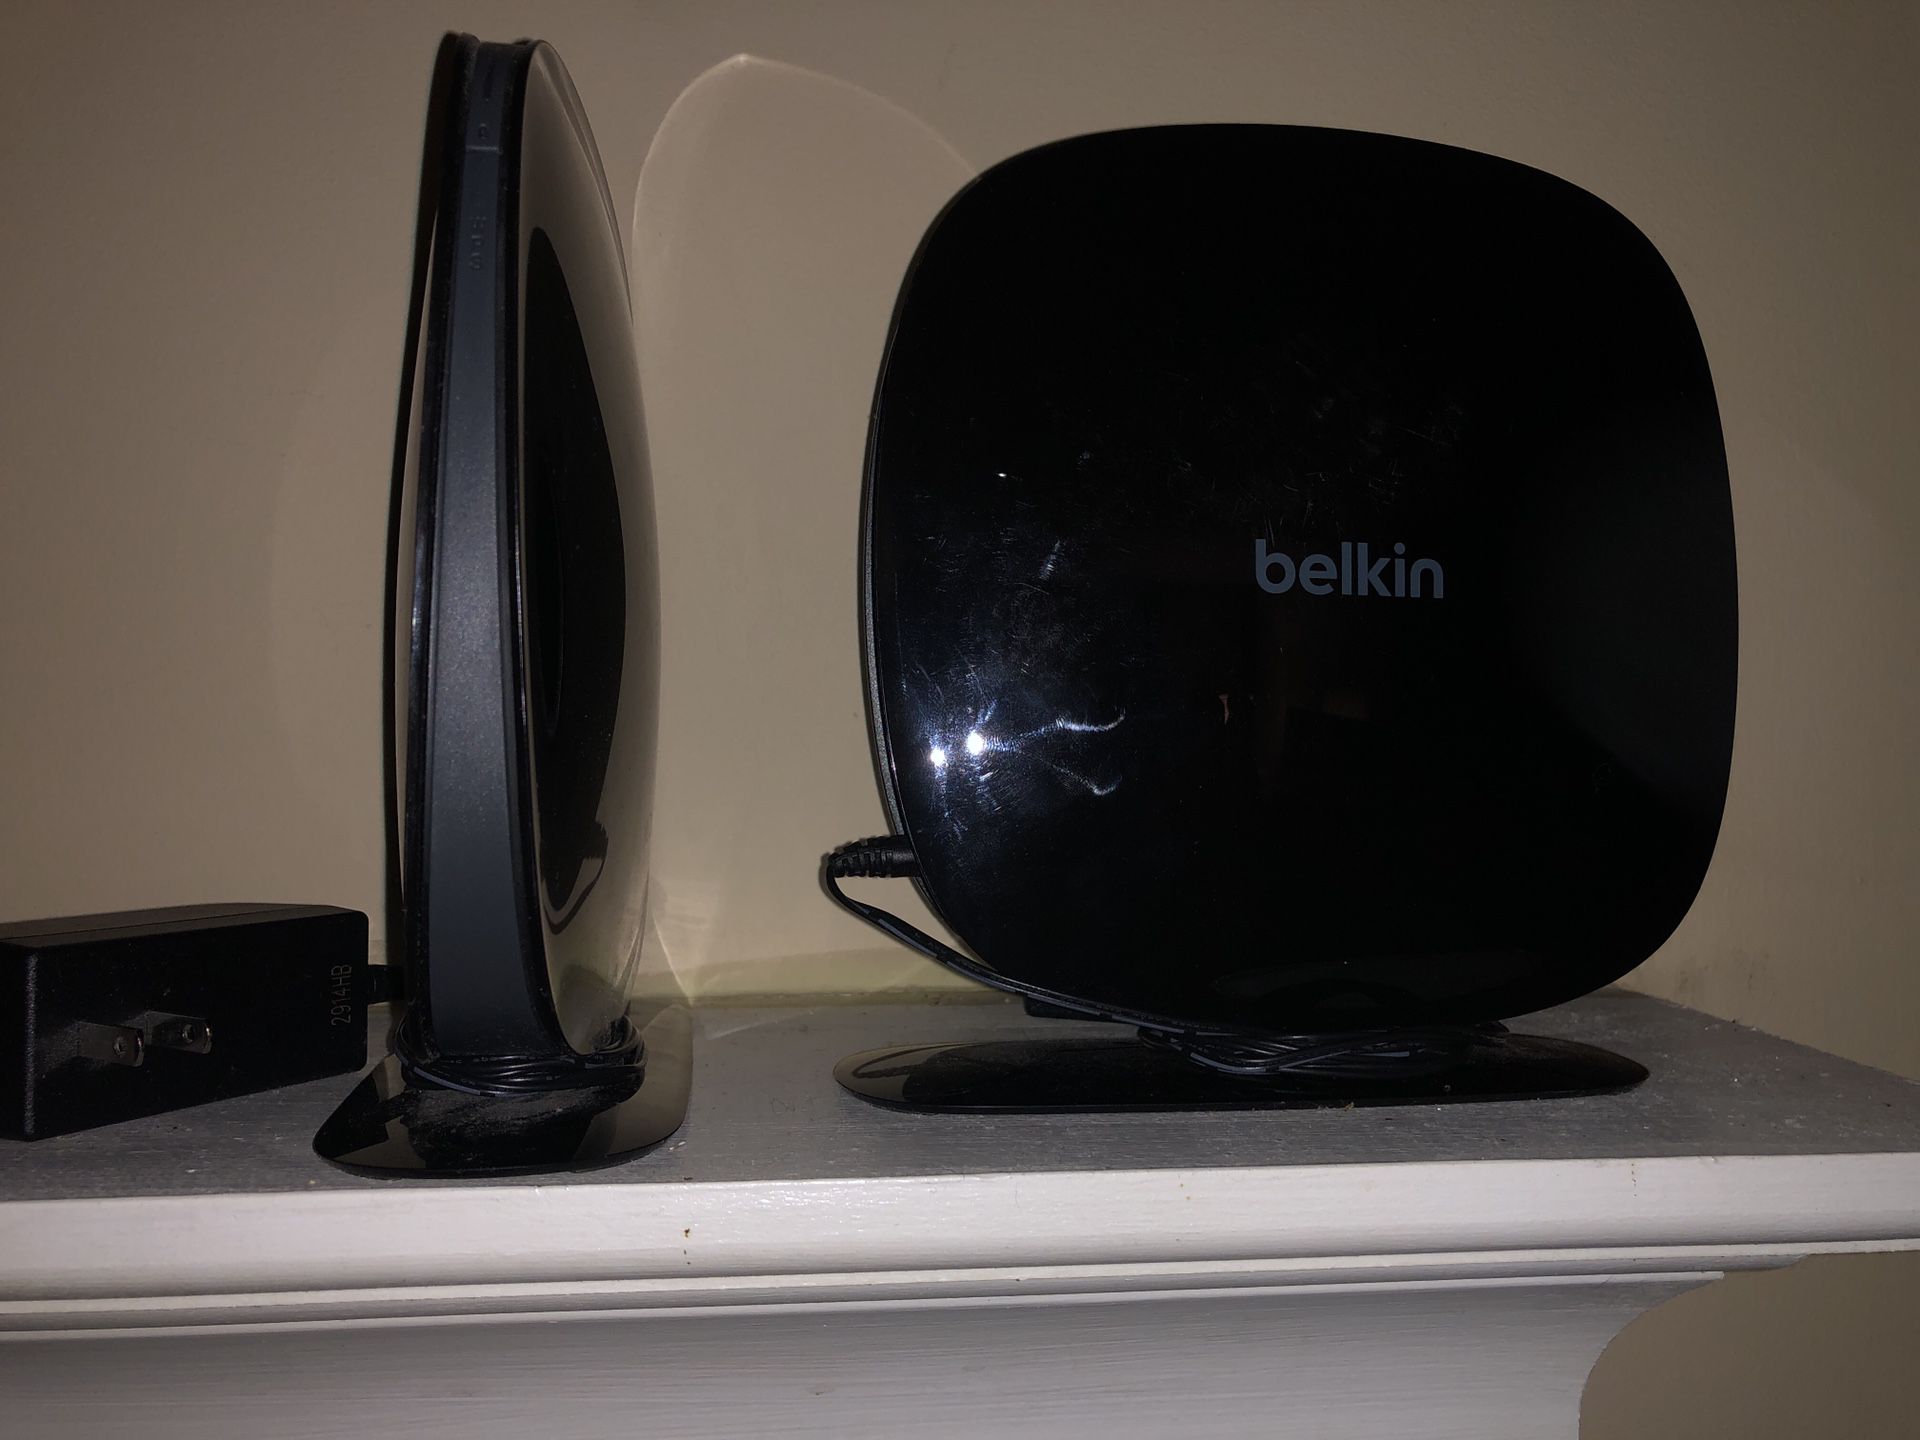 Belkin Dual Band Router